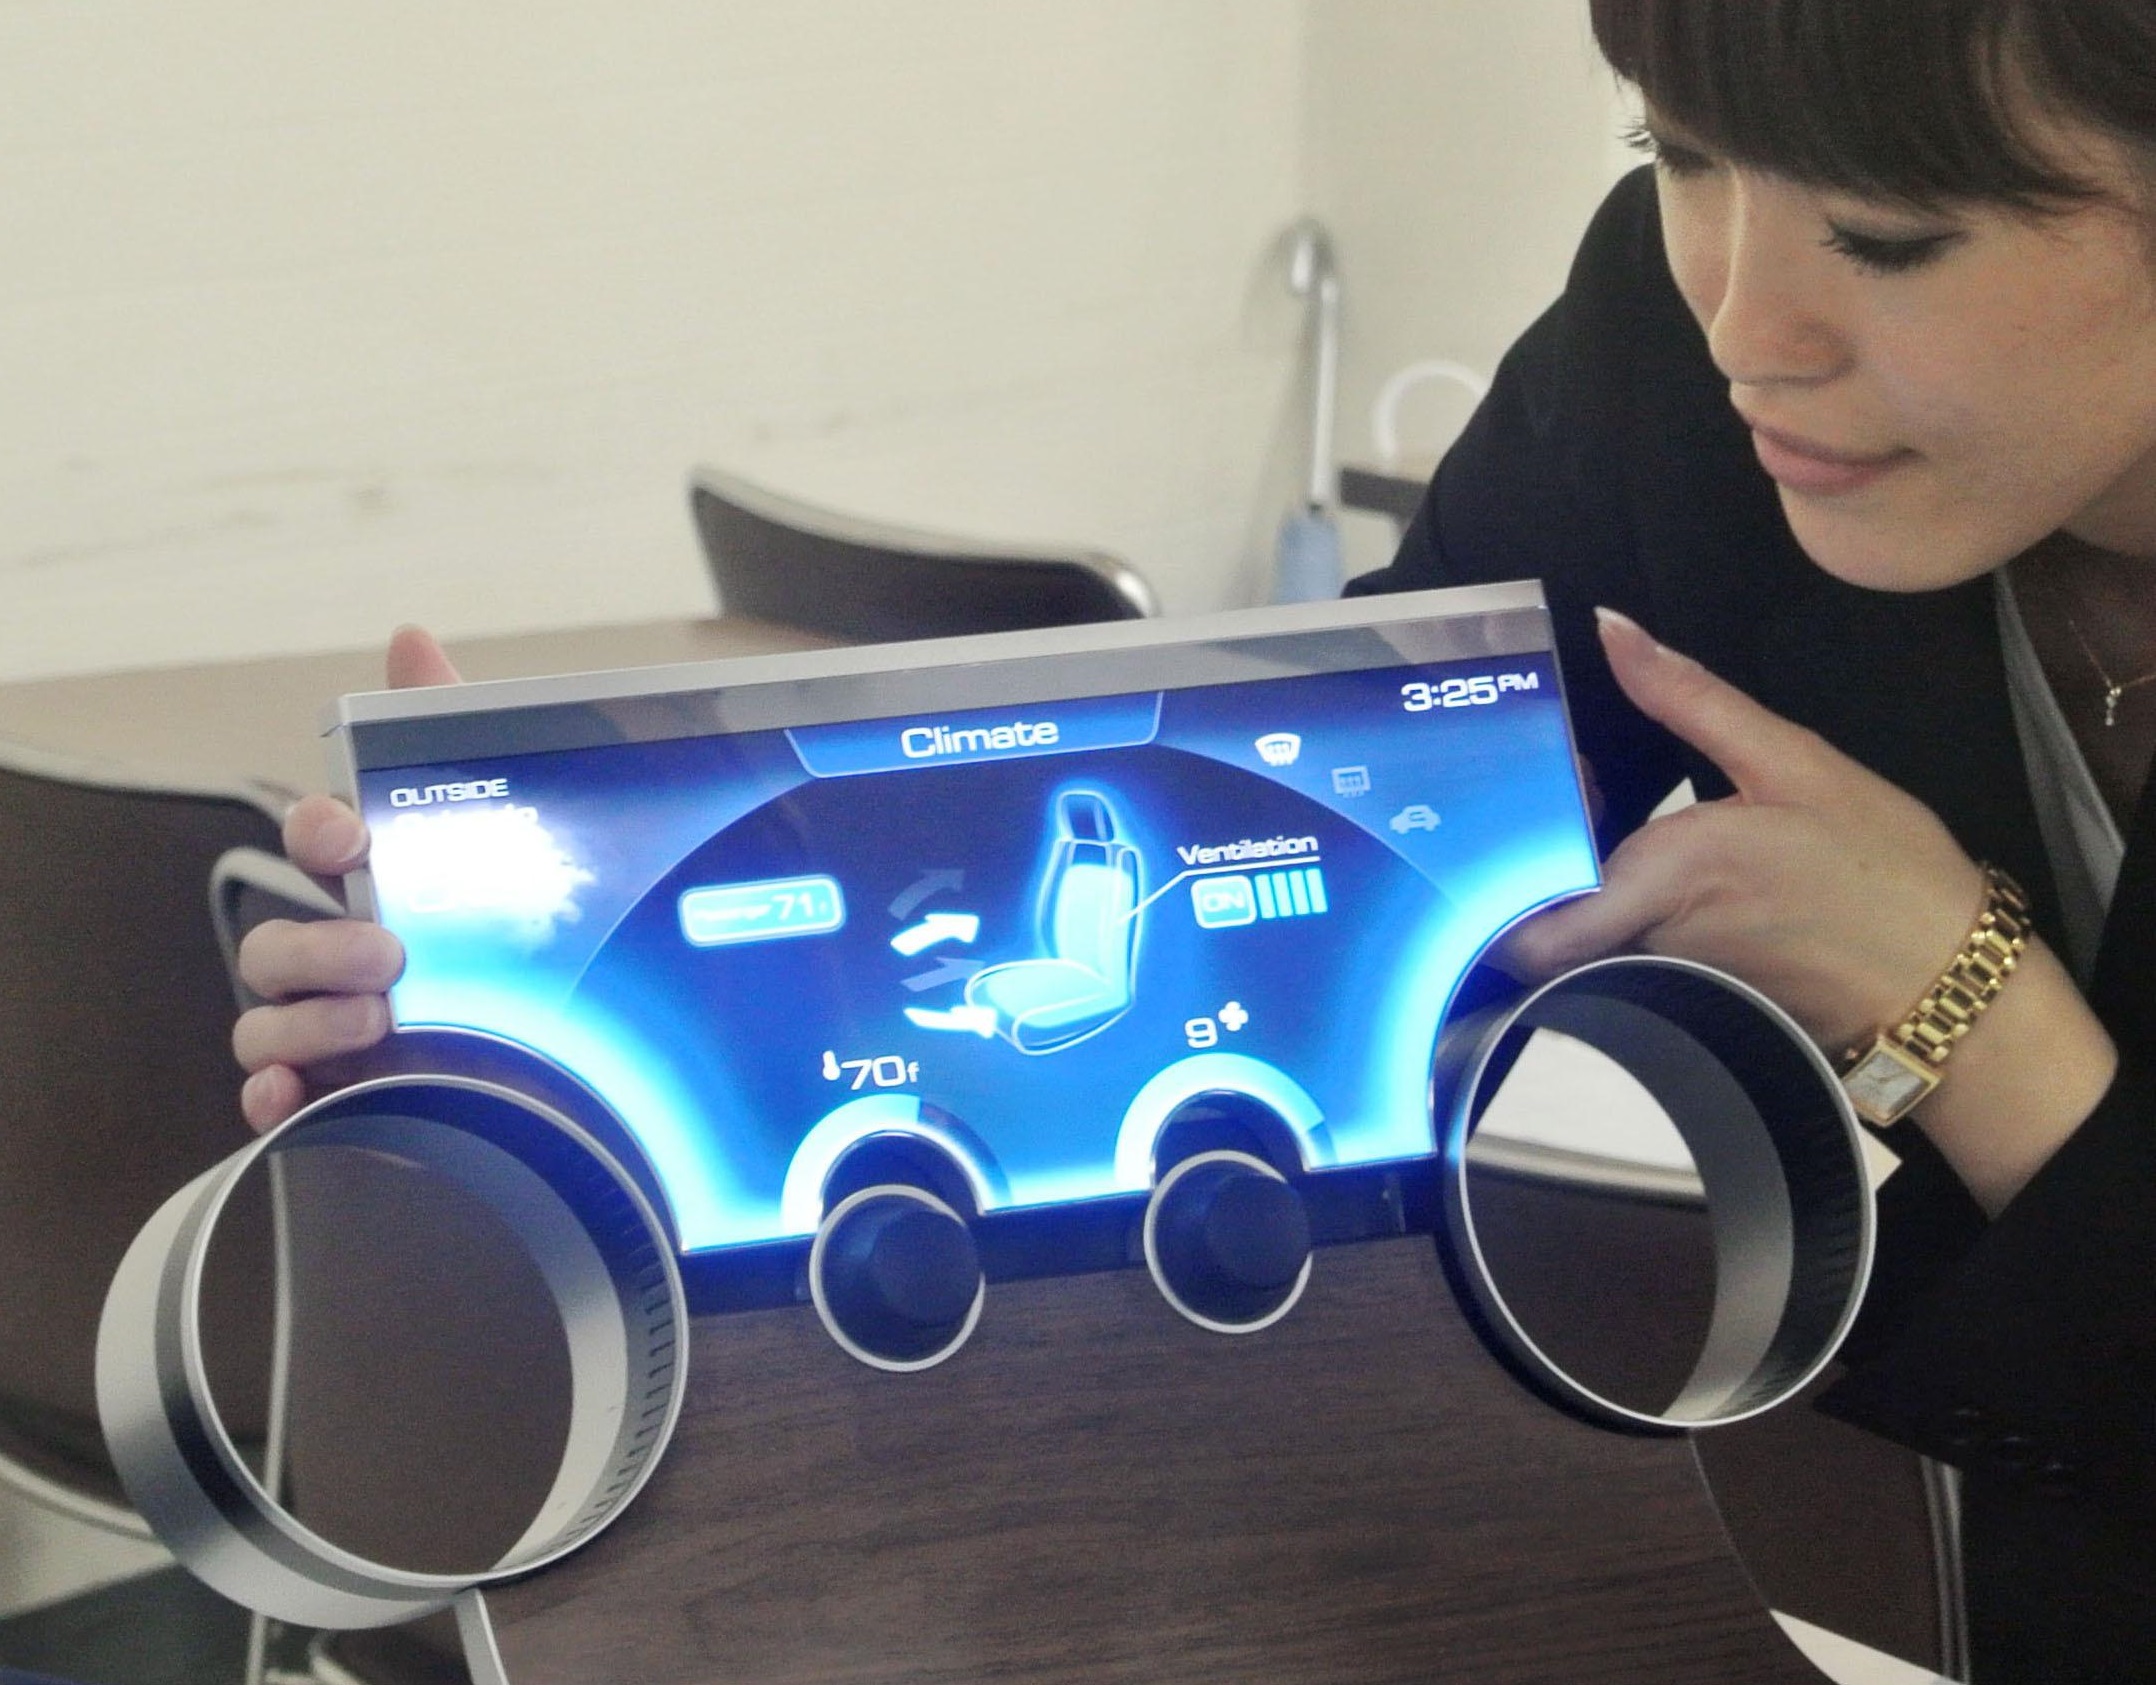 Sharp Corp.'s bendable liquid crystal display allows for a wide variety of applications. | KYODO